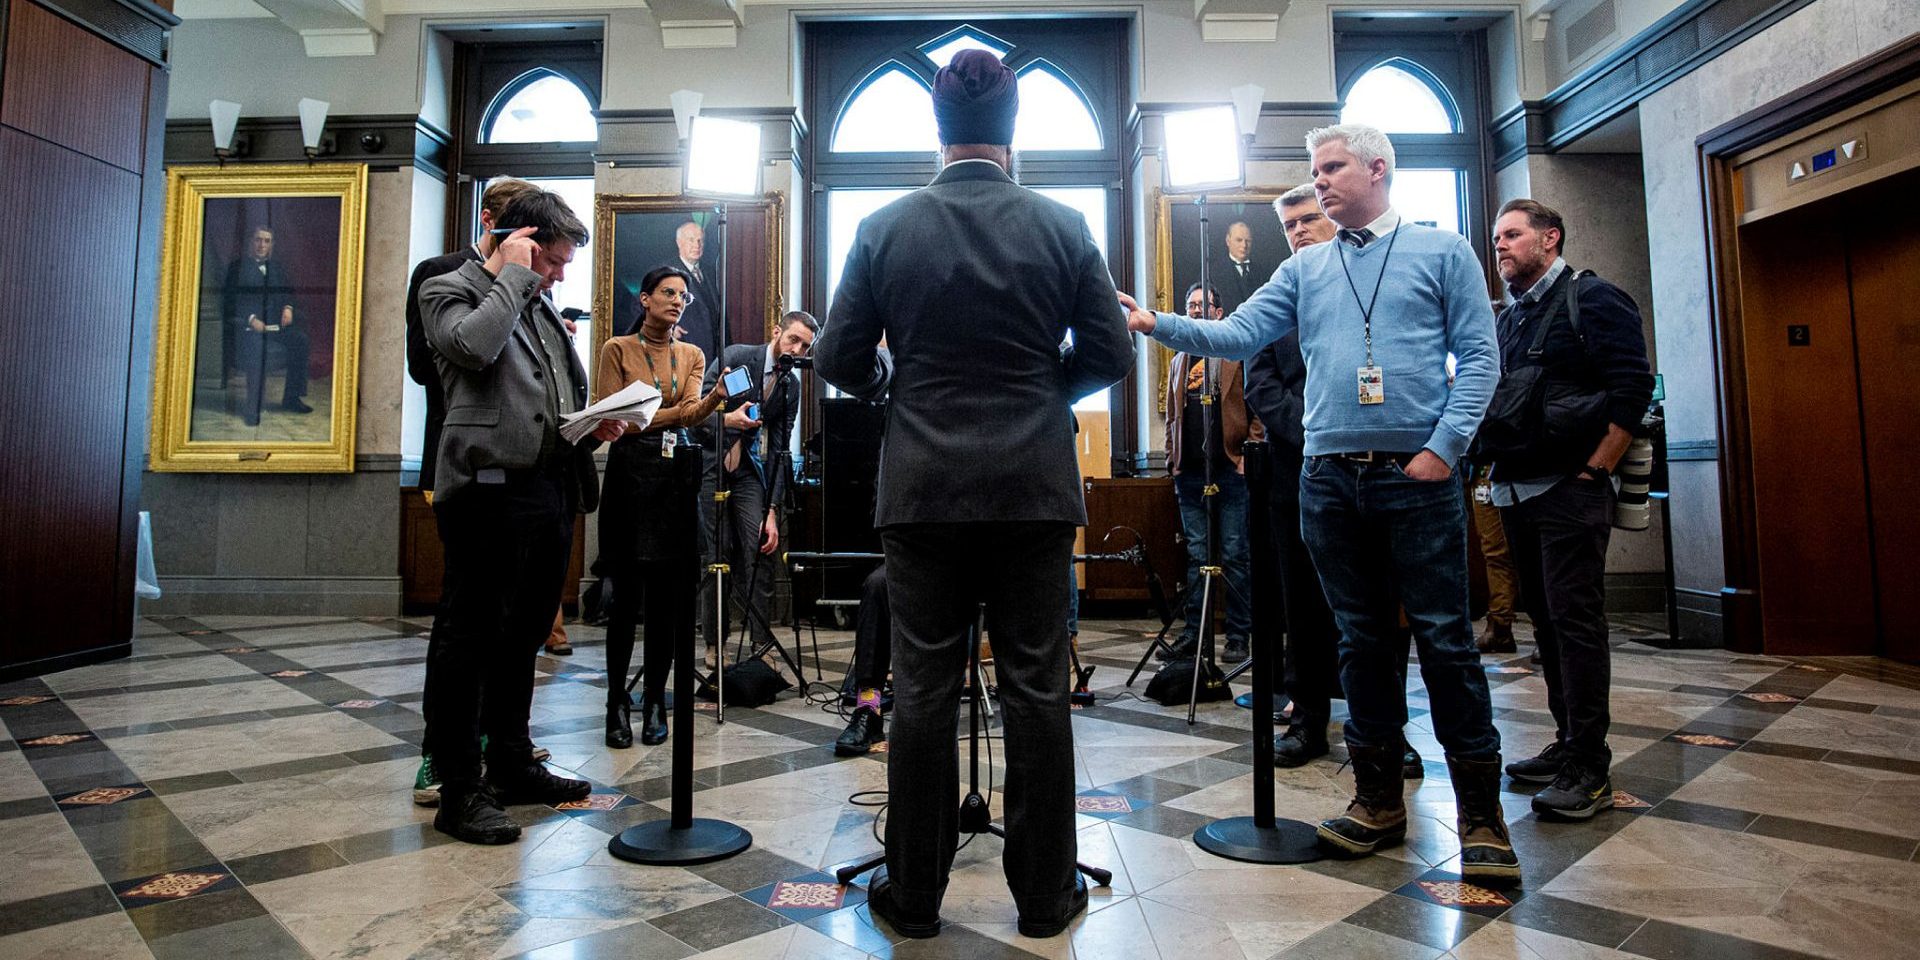 NDP leader Jagmeet Singh speaks with reporters on March 27, 2023, after the Auditor General’s March 2023 reports are tabled in the House of Commons. Andrew Meade